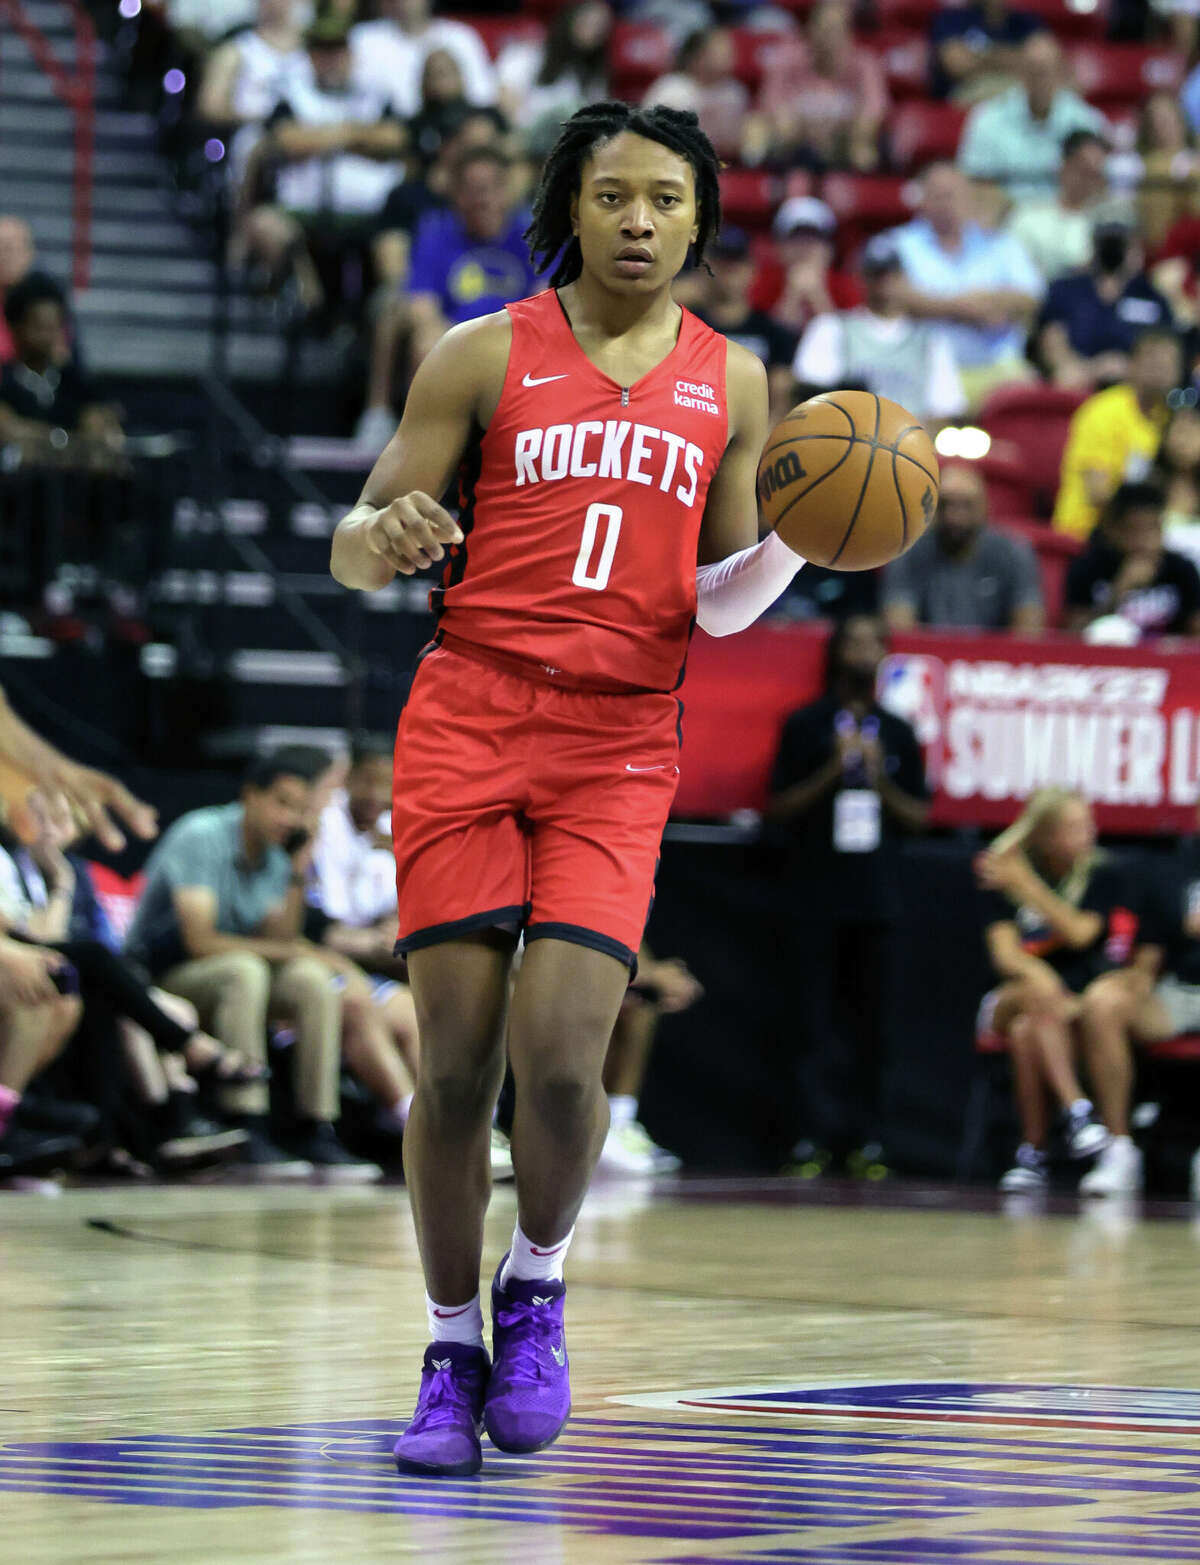 LAS VEGAS, NEVADA - JULY 11: TyTy Washington Jr. #2 of the Houston Rockets brings the ball up the court against the San Antonio Spurs during the 2022 NBA Summer League at the Thomas & Mack Center on July 11, 2022 in Las Vegas, Nevada. NOTE TO USER: User expressly acknowledges and agrees that, by downloading and or using this photograph, User is consenting to the terms and conditions of the Getty Images License Agreement. (Photo by Ethan Miller/Getty Images)